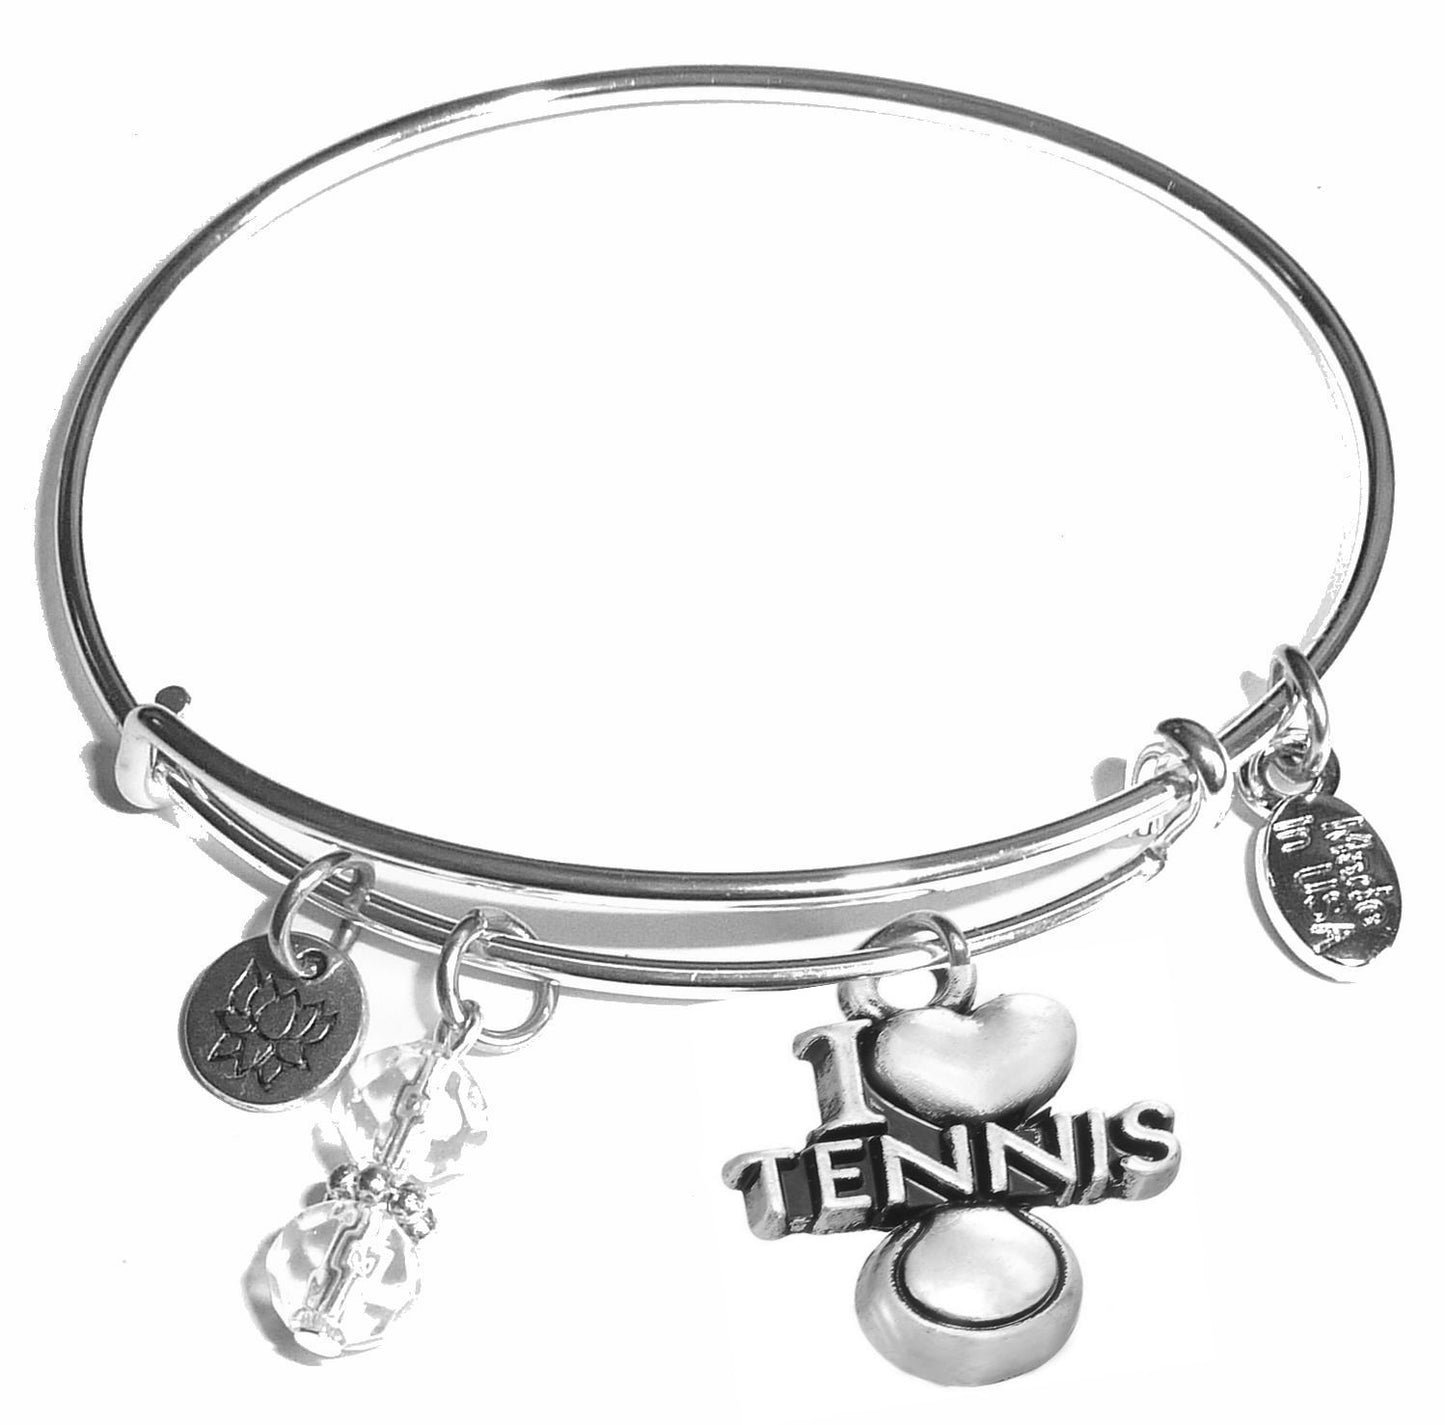 I Love Tennis - Message Bangle Bracelet - Expandable Wire Bracelet– Comes in a gift box